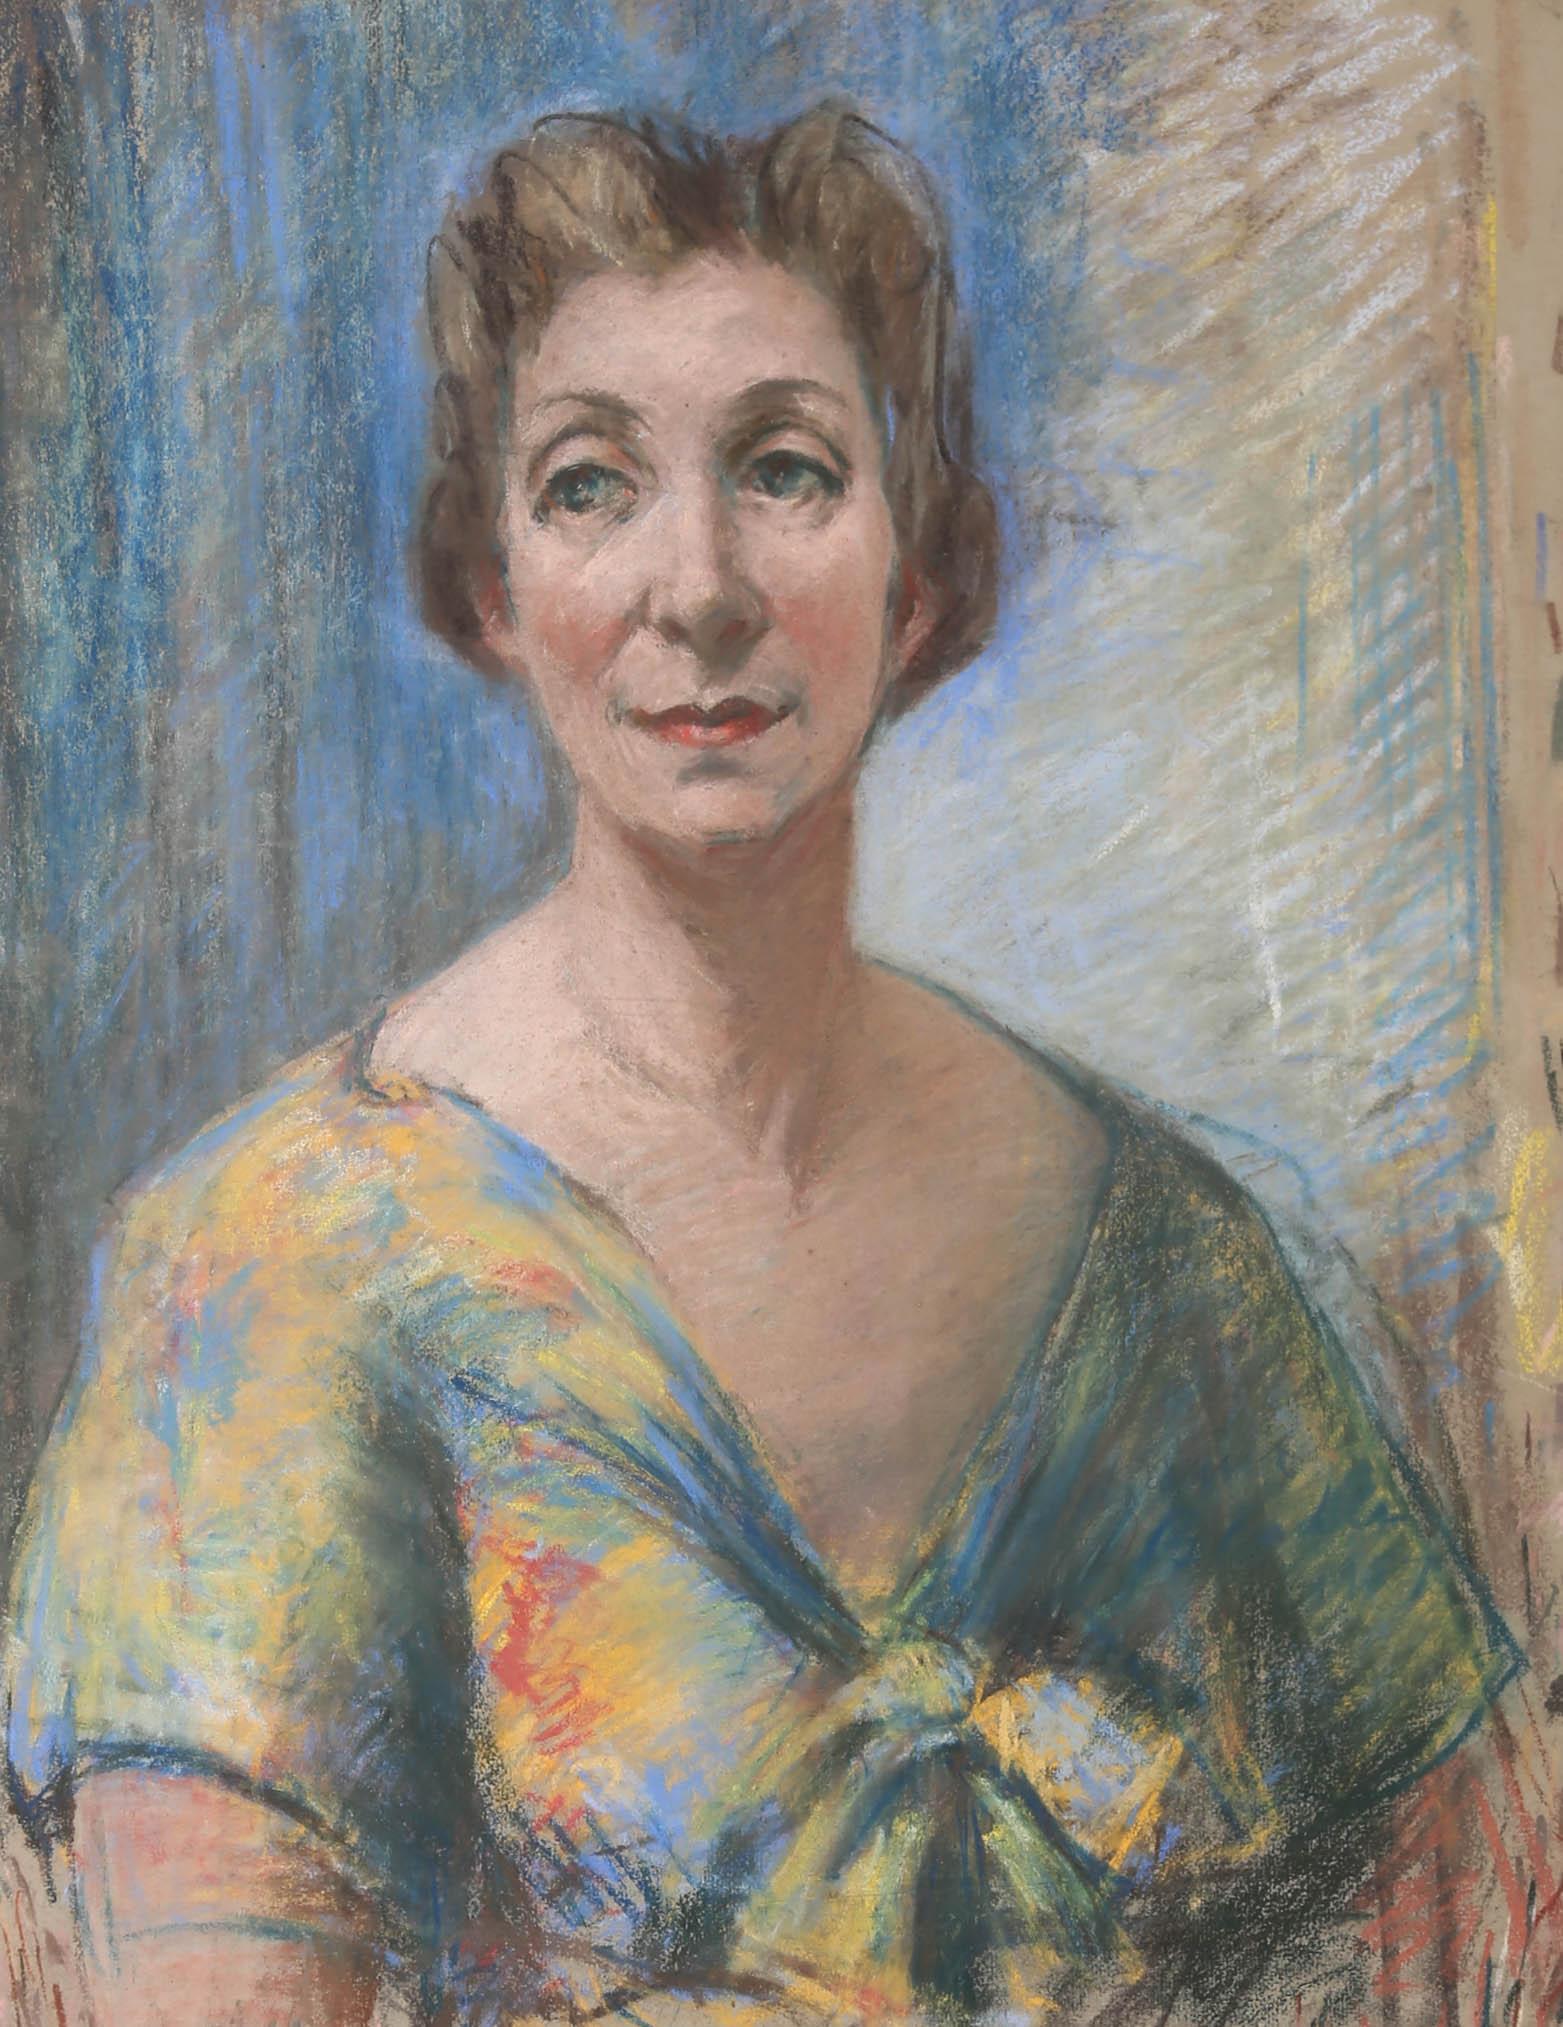 A fine Mid Century portrait of an elegant woman with red lipstick and a colourful summer dress. She has a soft, kindly smile and gentle eyes. The drawing is unsigned. On paper.